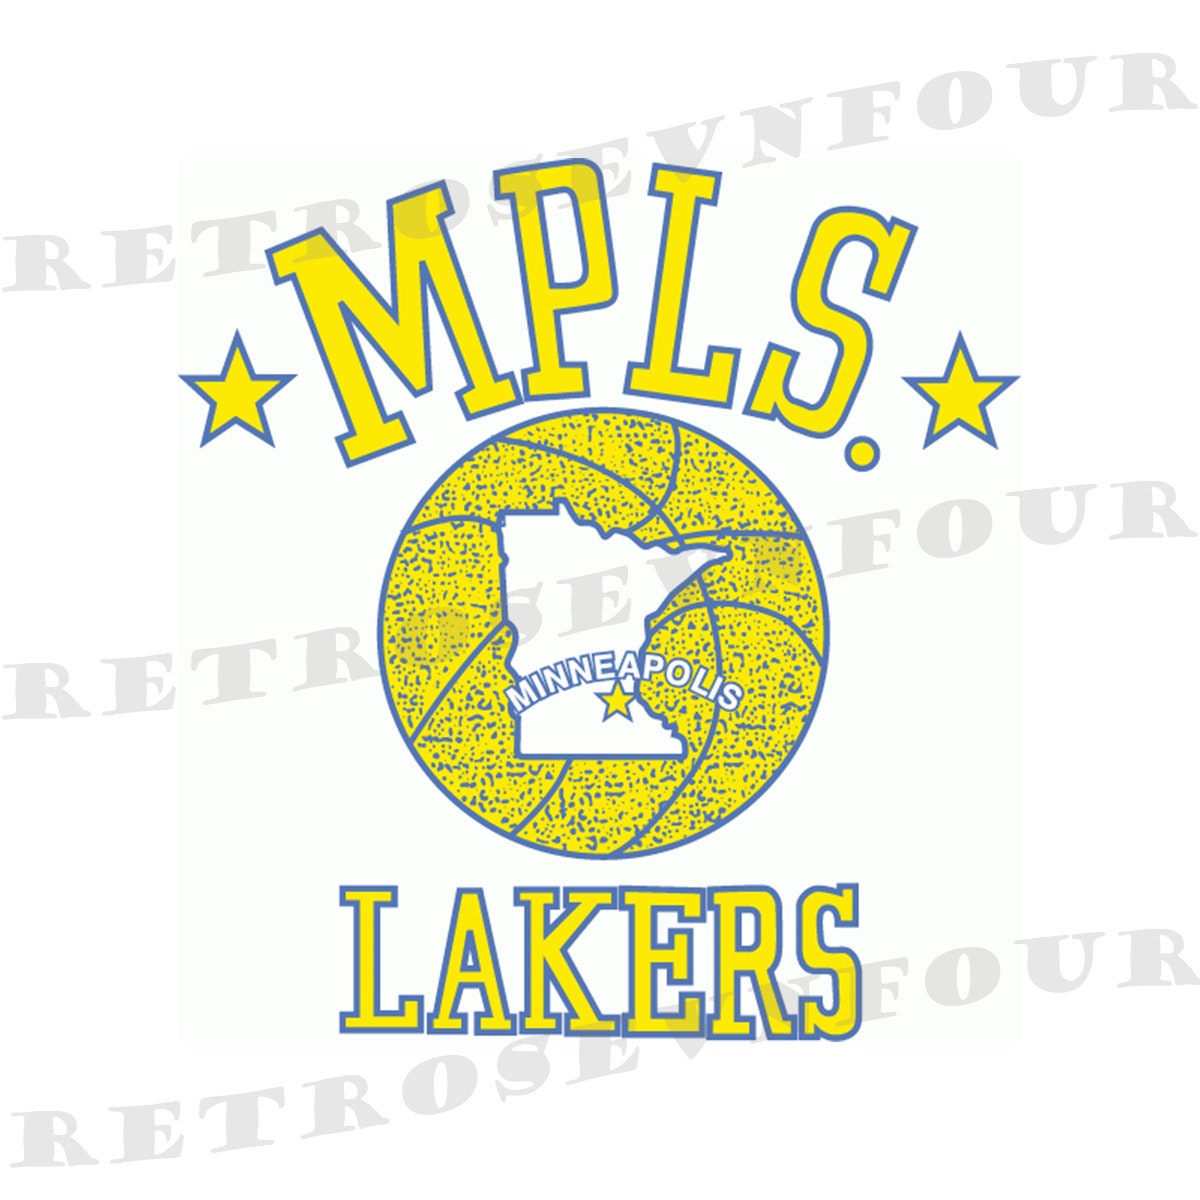 Mitchell And Ness - Minneapolis Lakers Mens Nba Dark 1948 George Mikan  Jersey